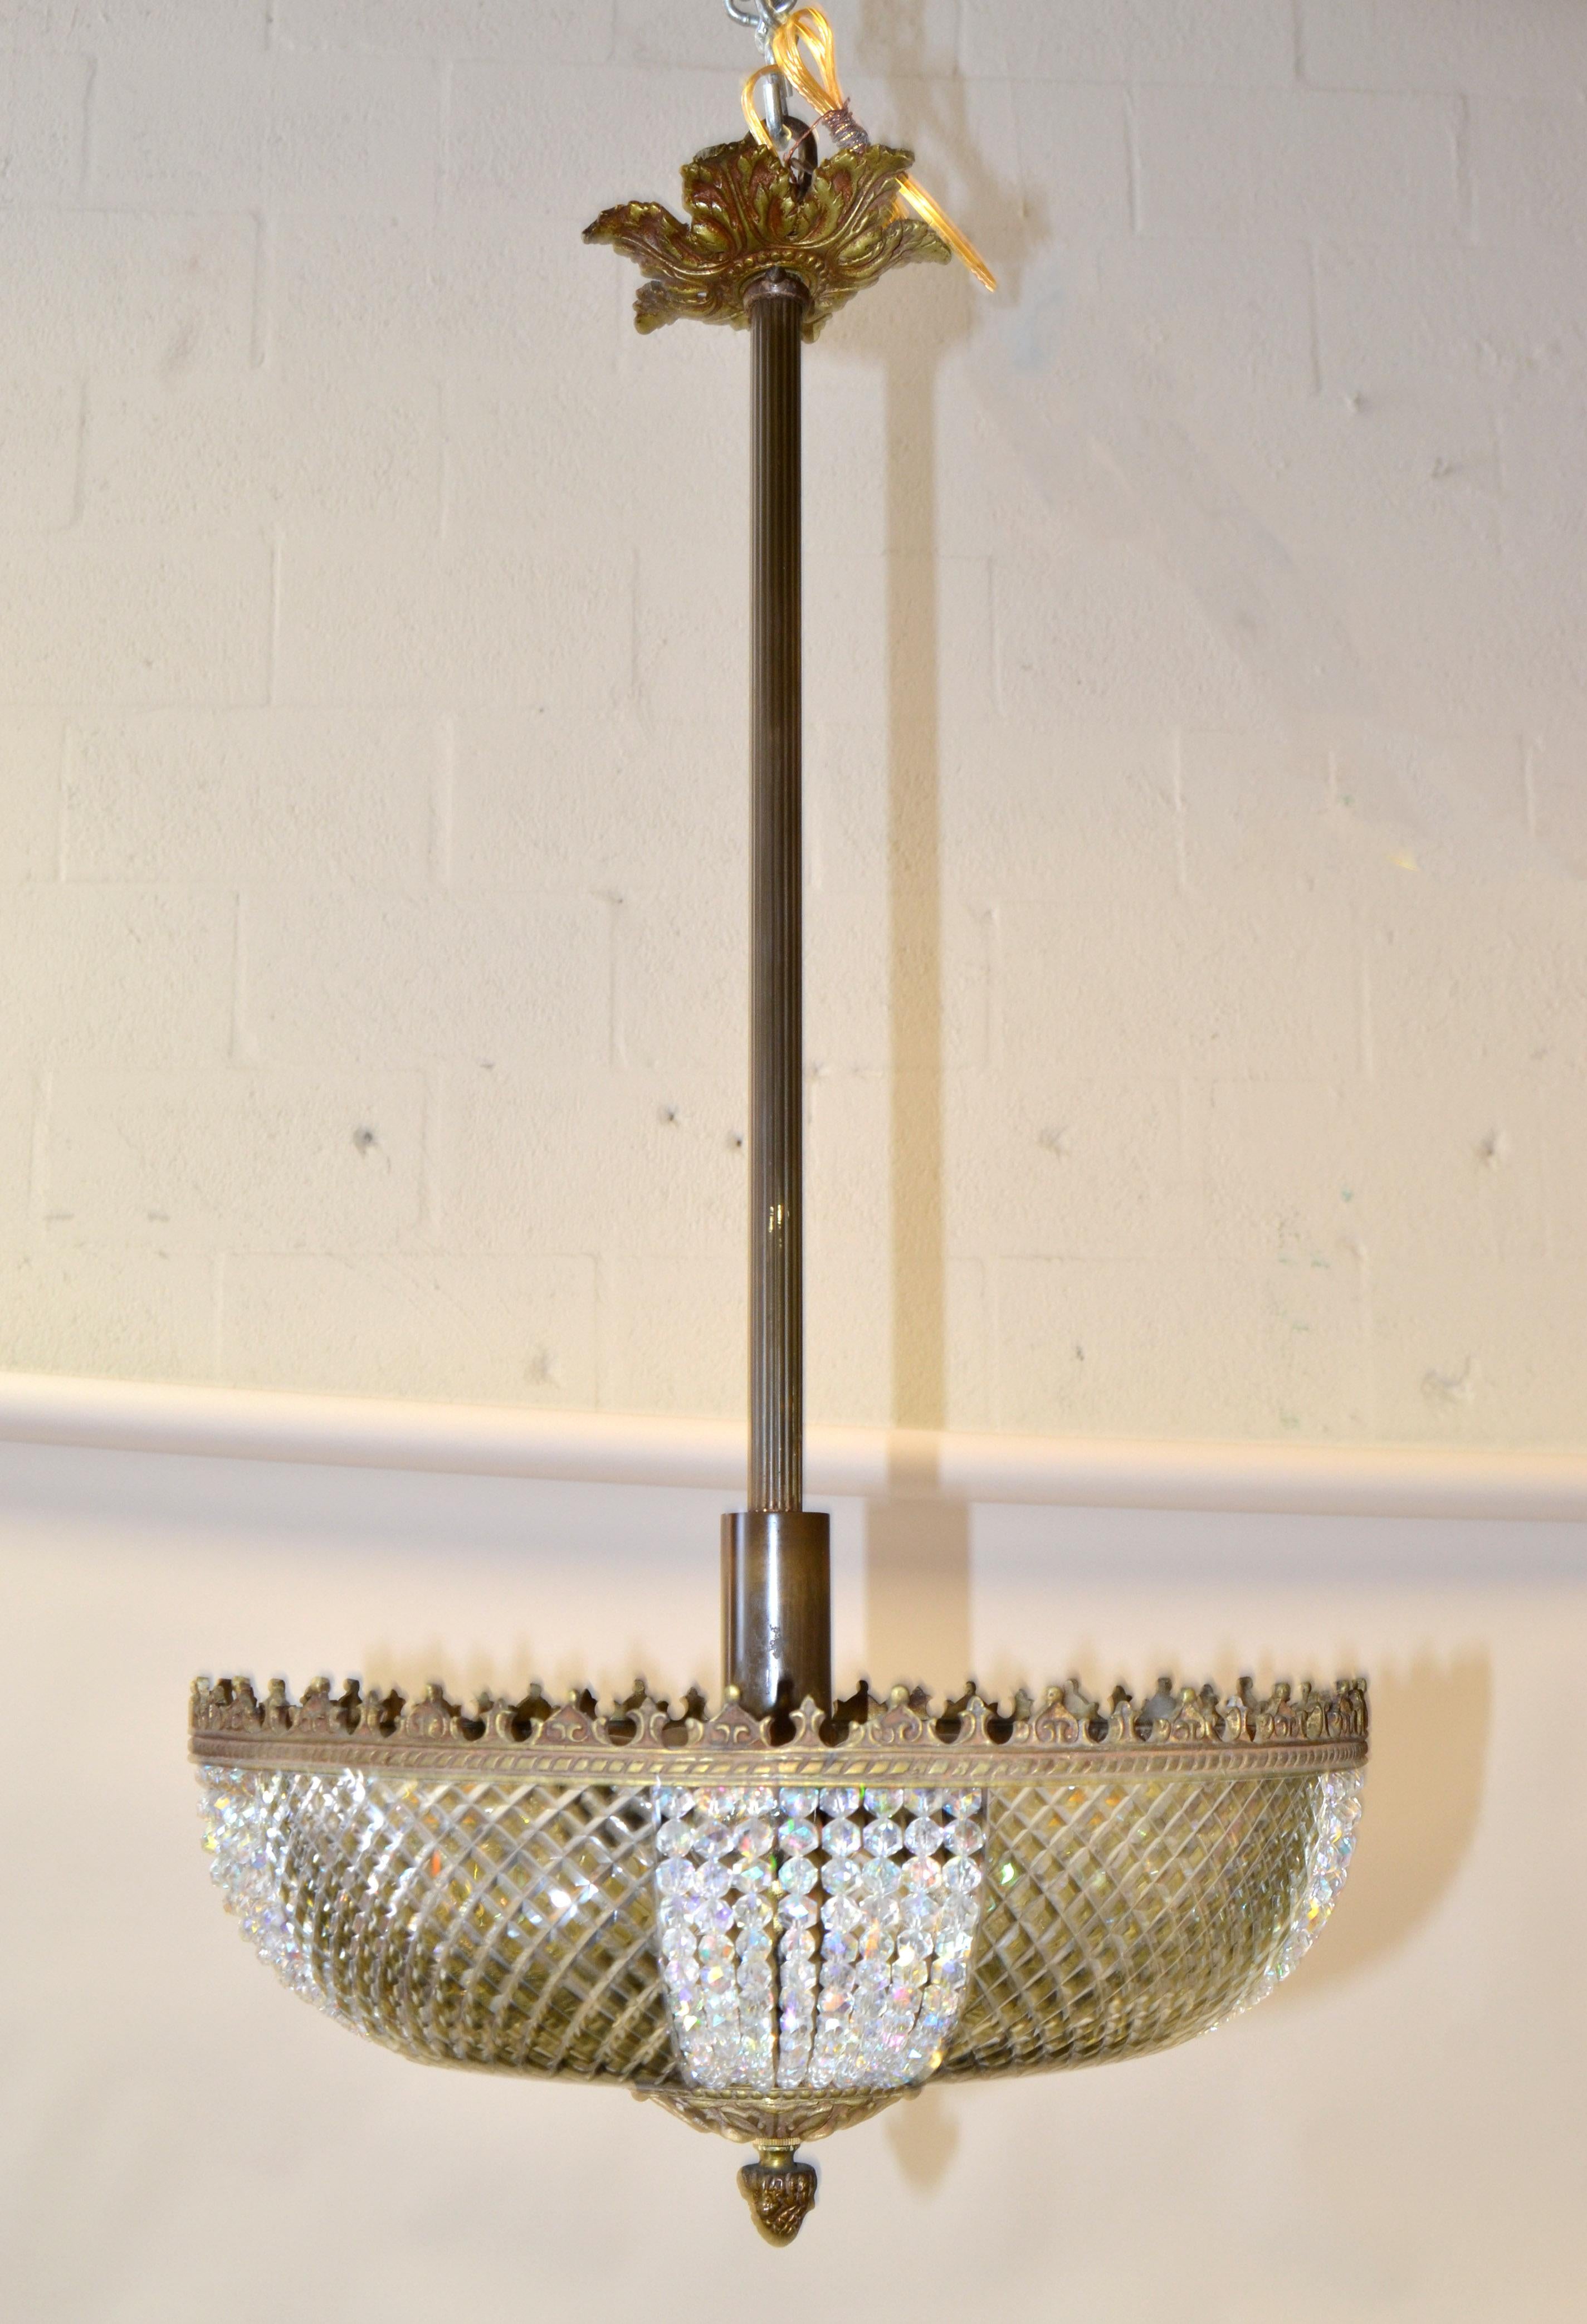 Mid-Century Modern crystal and bronze 5-light pendant light in the style of
J. L. Lobmeyr made in Austria.
All crystals are present, and the pendant Light is in original condition.
Warm aged patina to the bronze.
In working condition and it